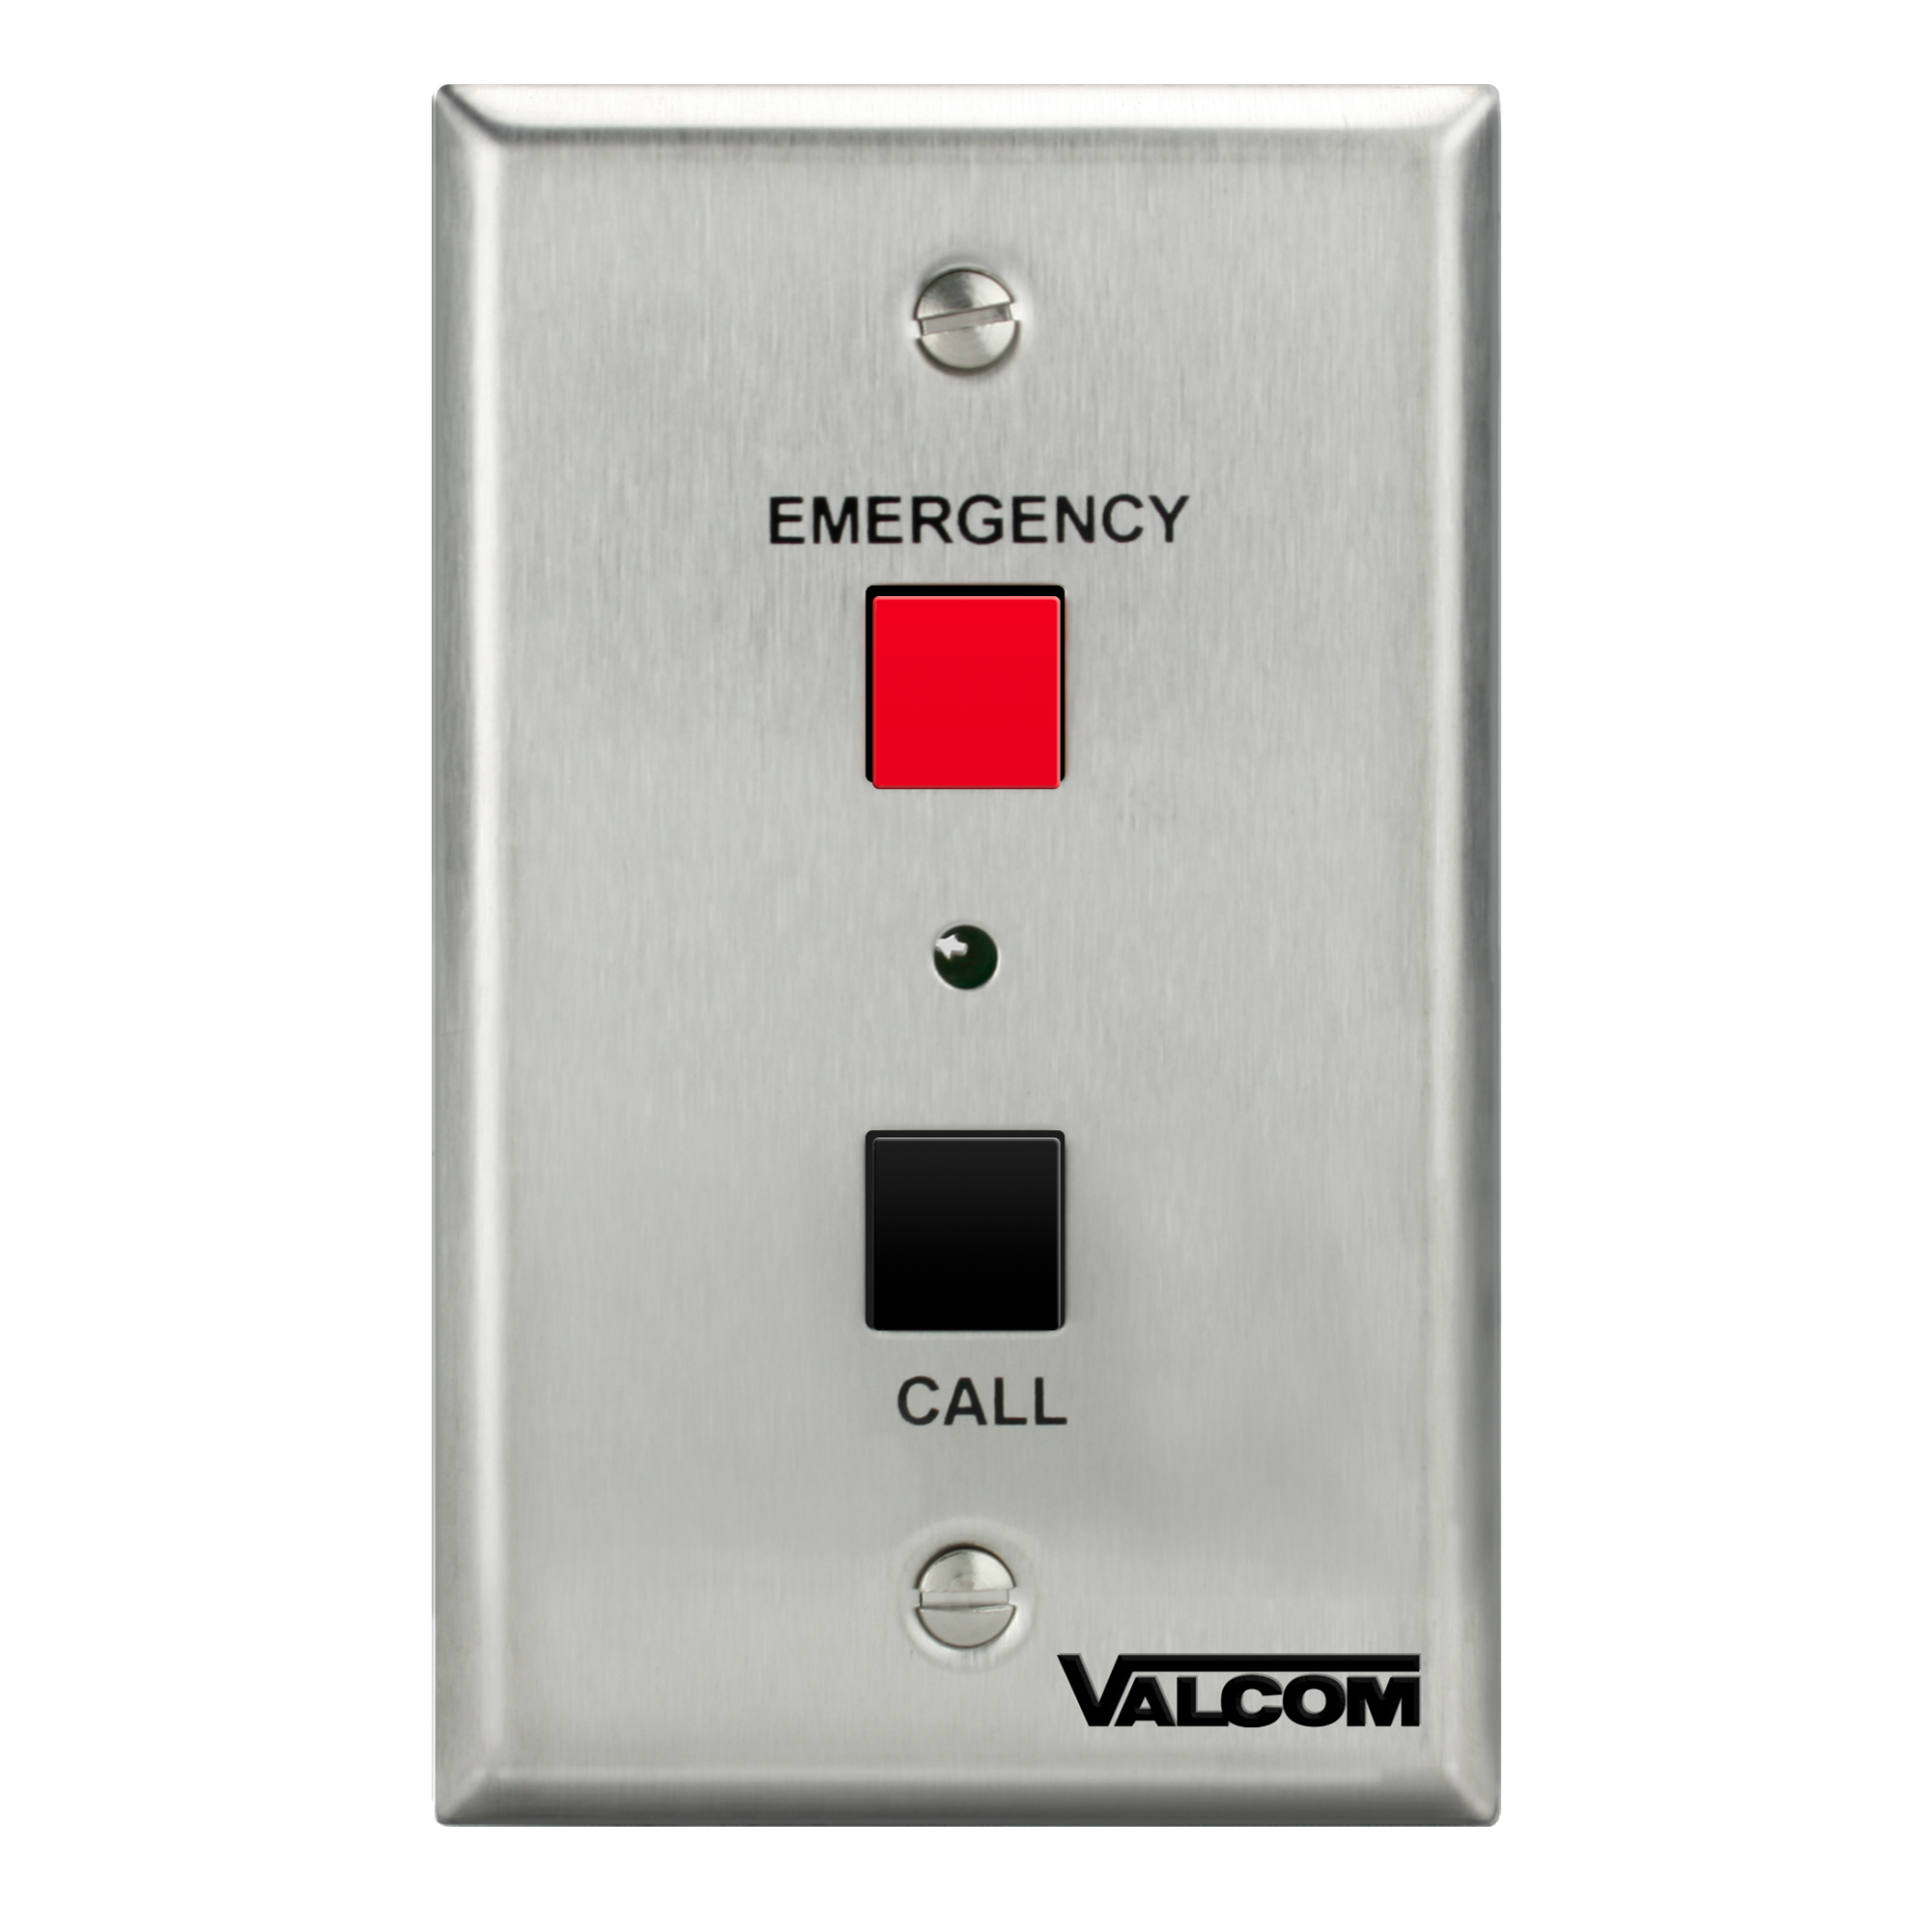 V-2970 Emergency/Normal Call Button, with Volume Control, Stainless Steel